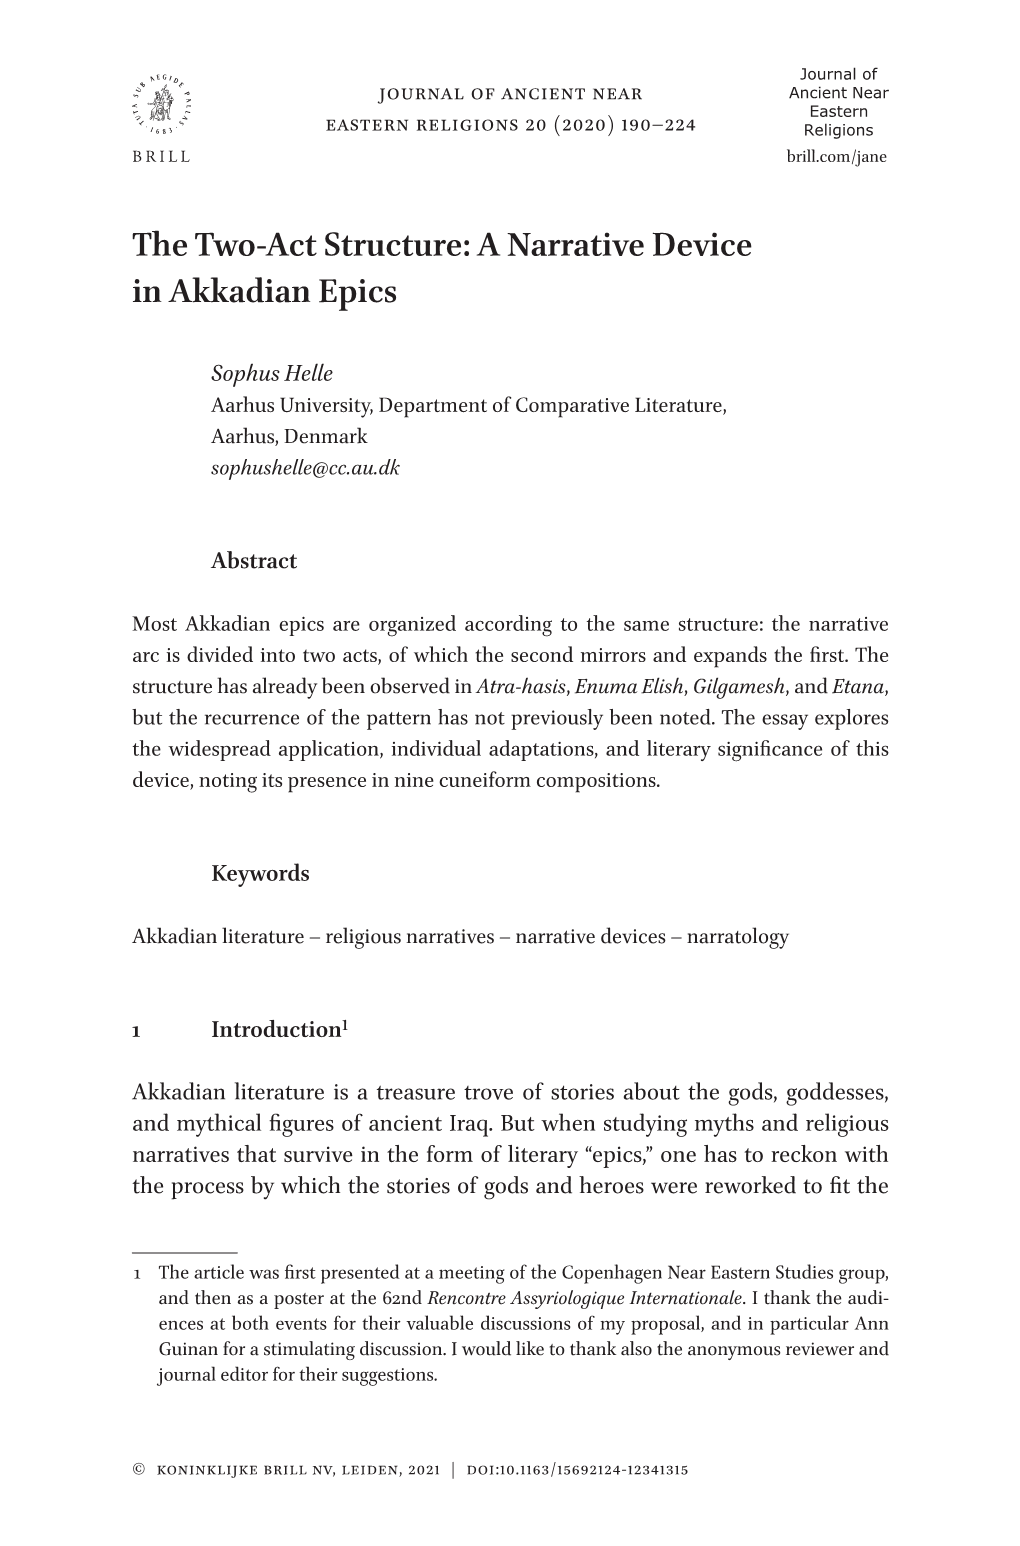 The Two-Act Structure: a Narrative Device in Akkadian Epics